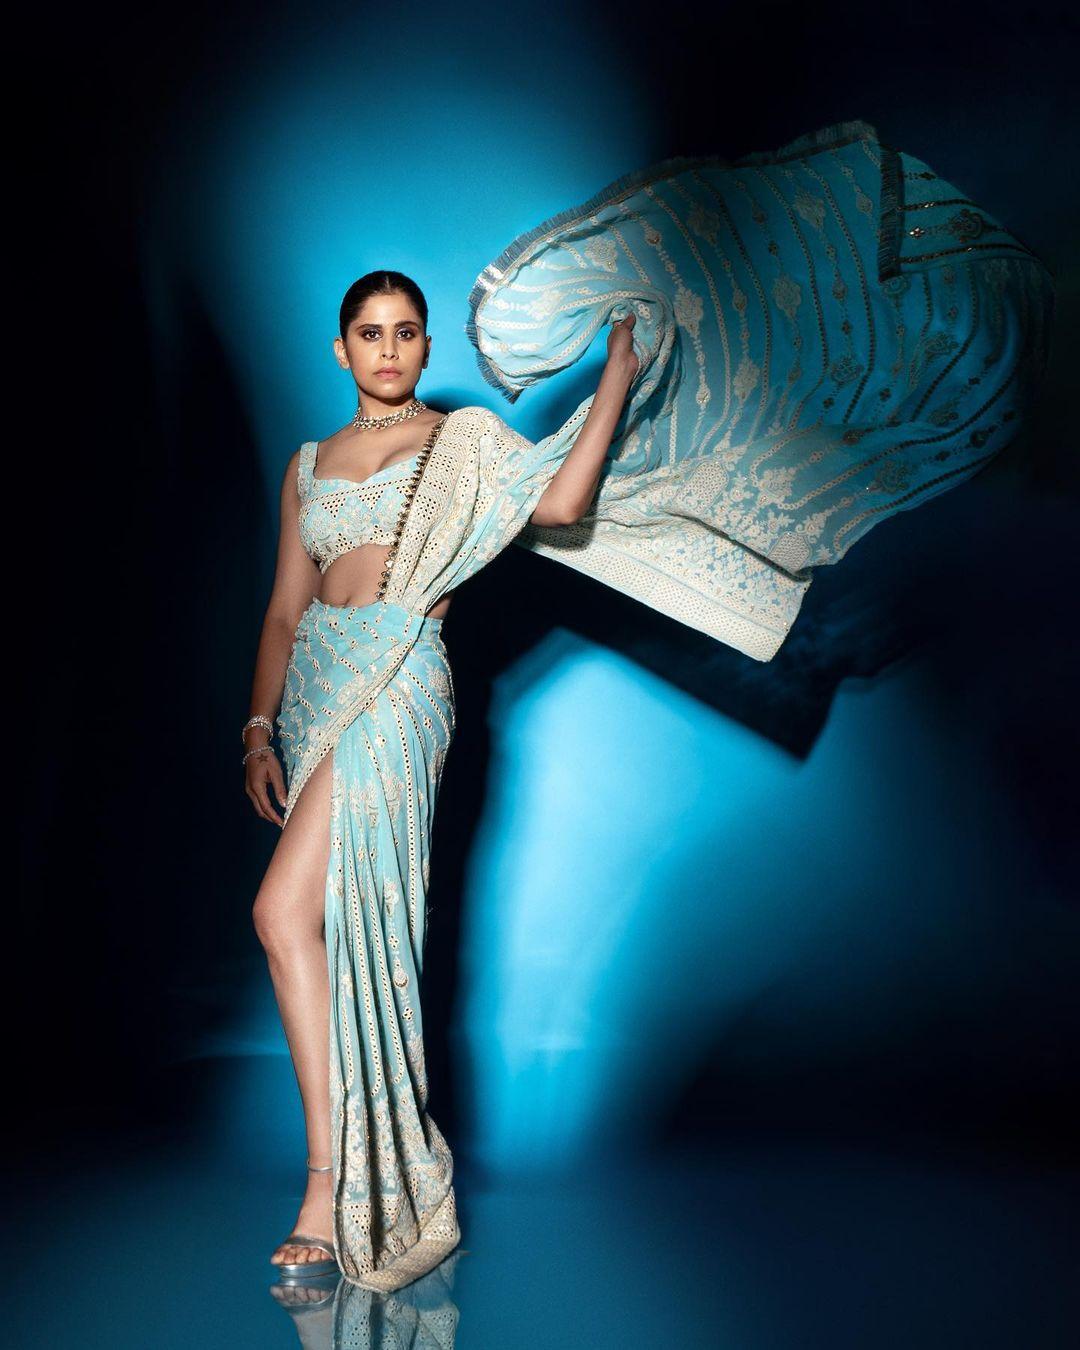 The stylish blue saree featured a thigh-high slit and beautiful mirror work. Sai paired it with a matching blouse, opting for a chic necklace instead of heavy jewellery